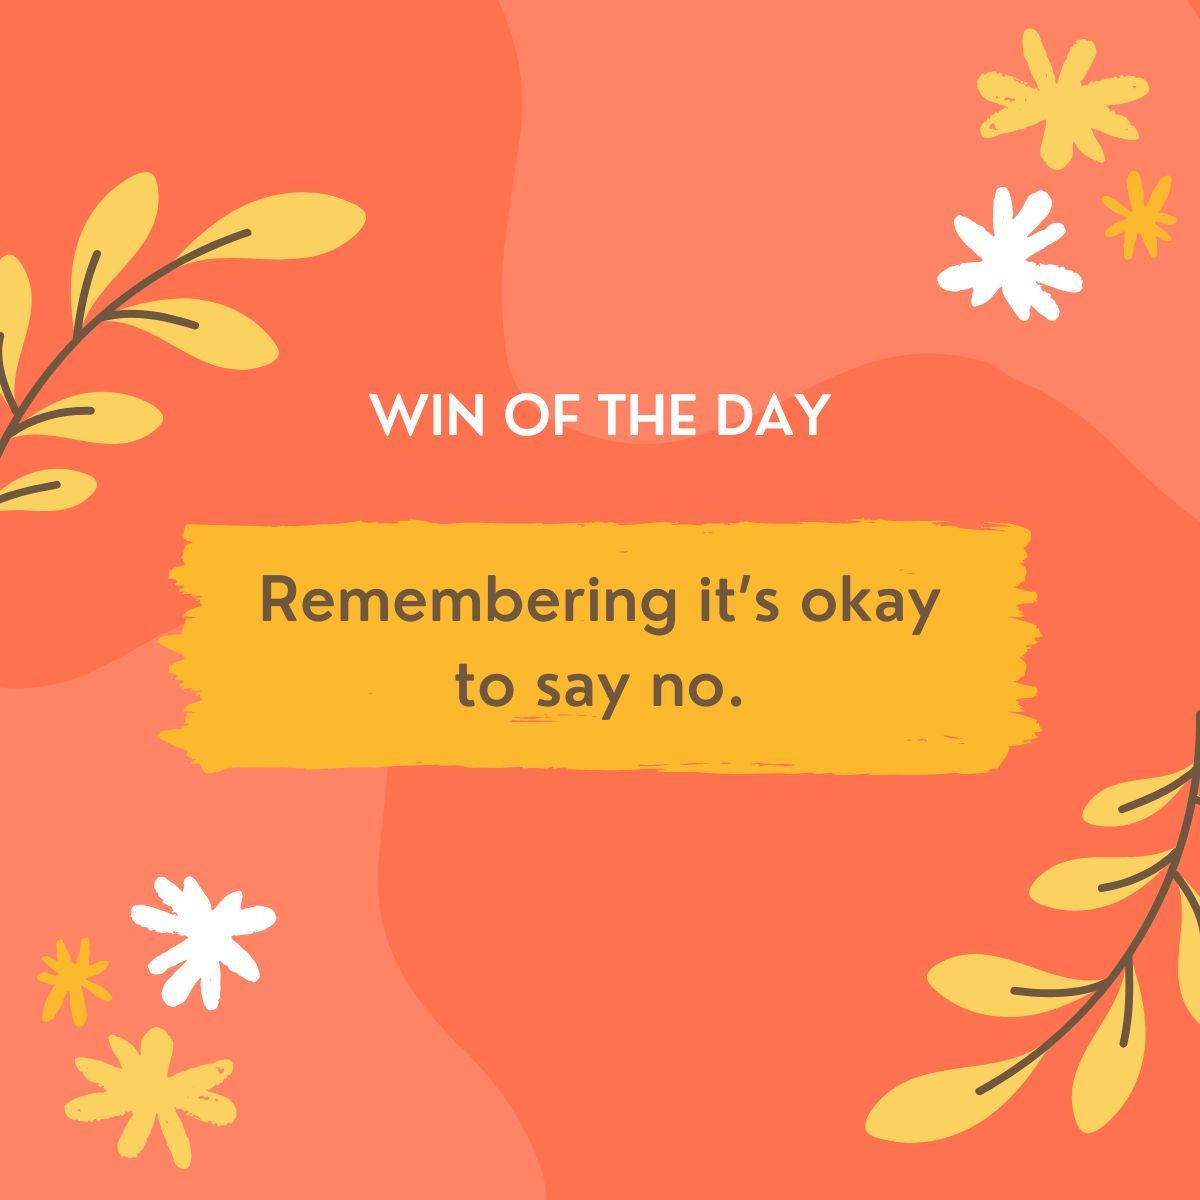 It really is ok

#winoftheday #dailygratitude #dailyreflection #noisok